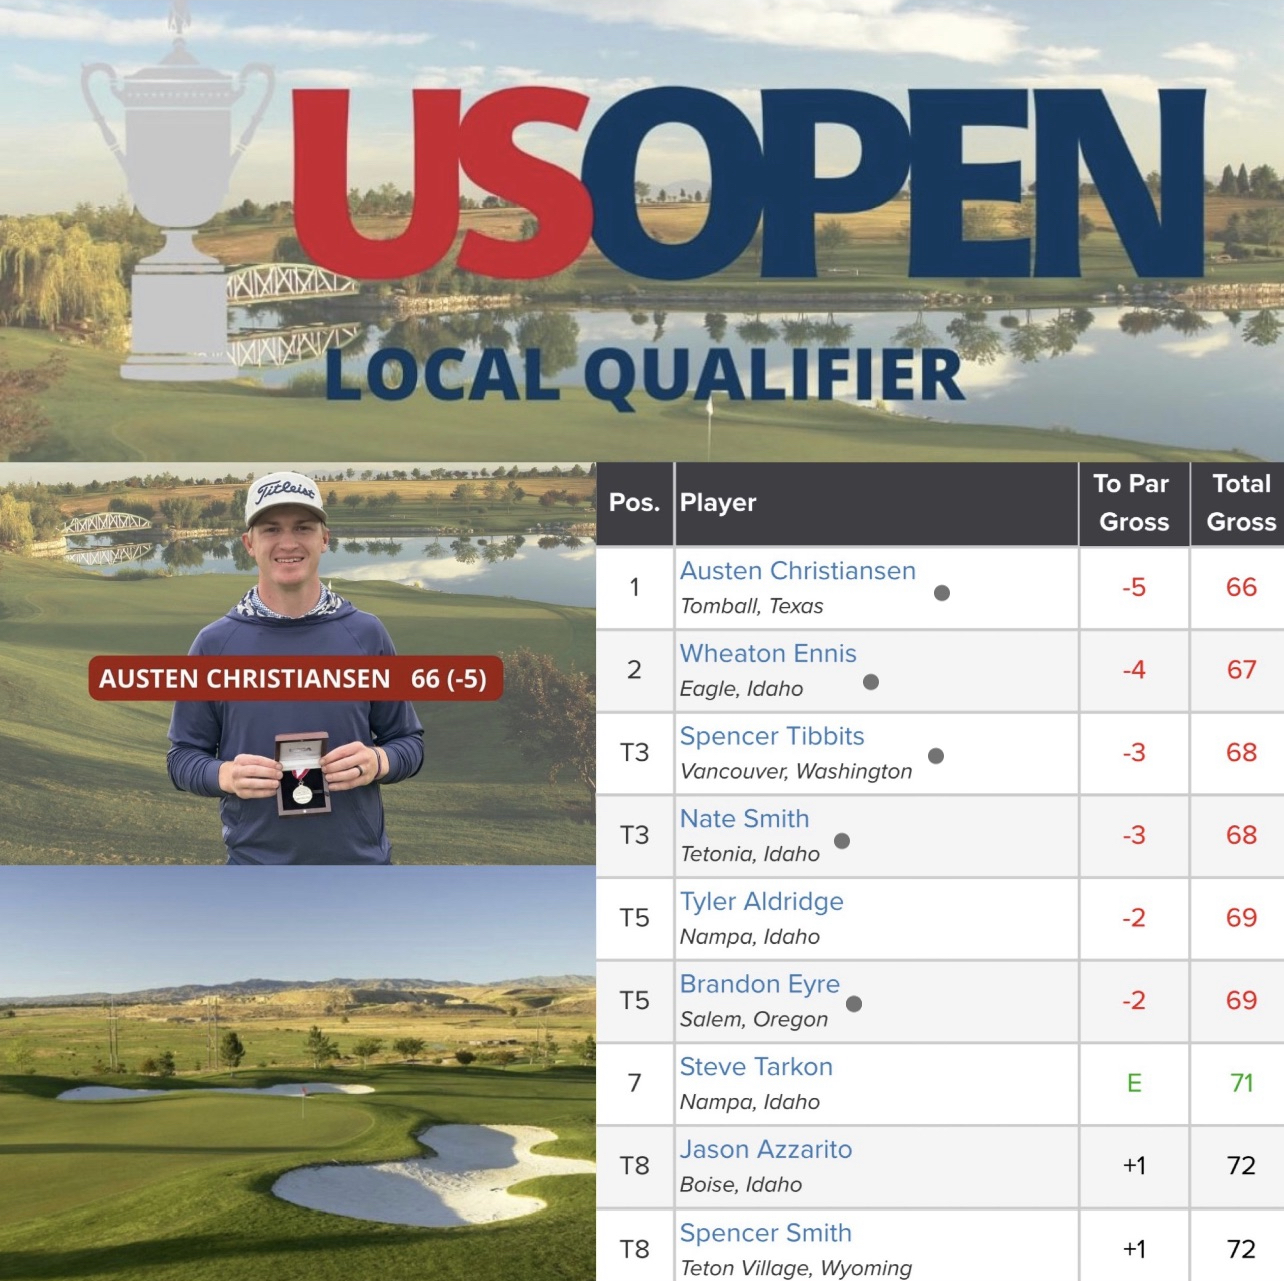 🇺🇸 U.S. Open Local Qualifying sees 5 players soar into final qualifying